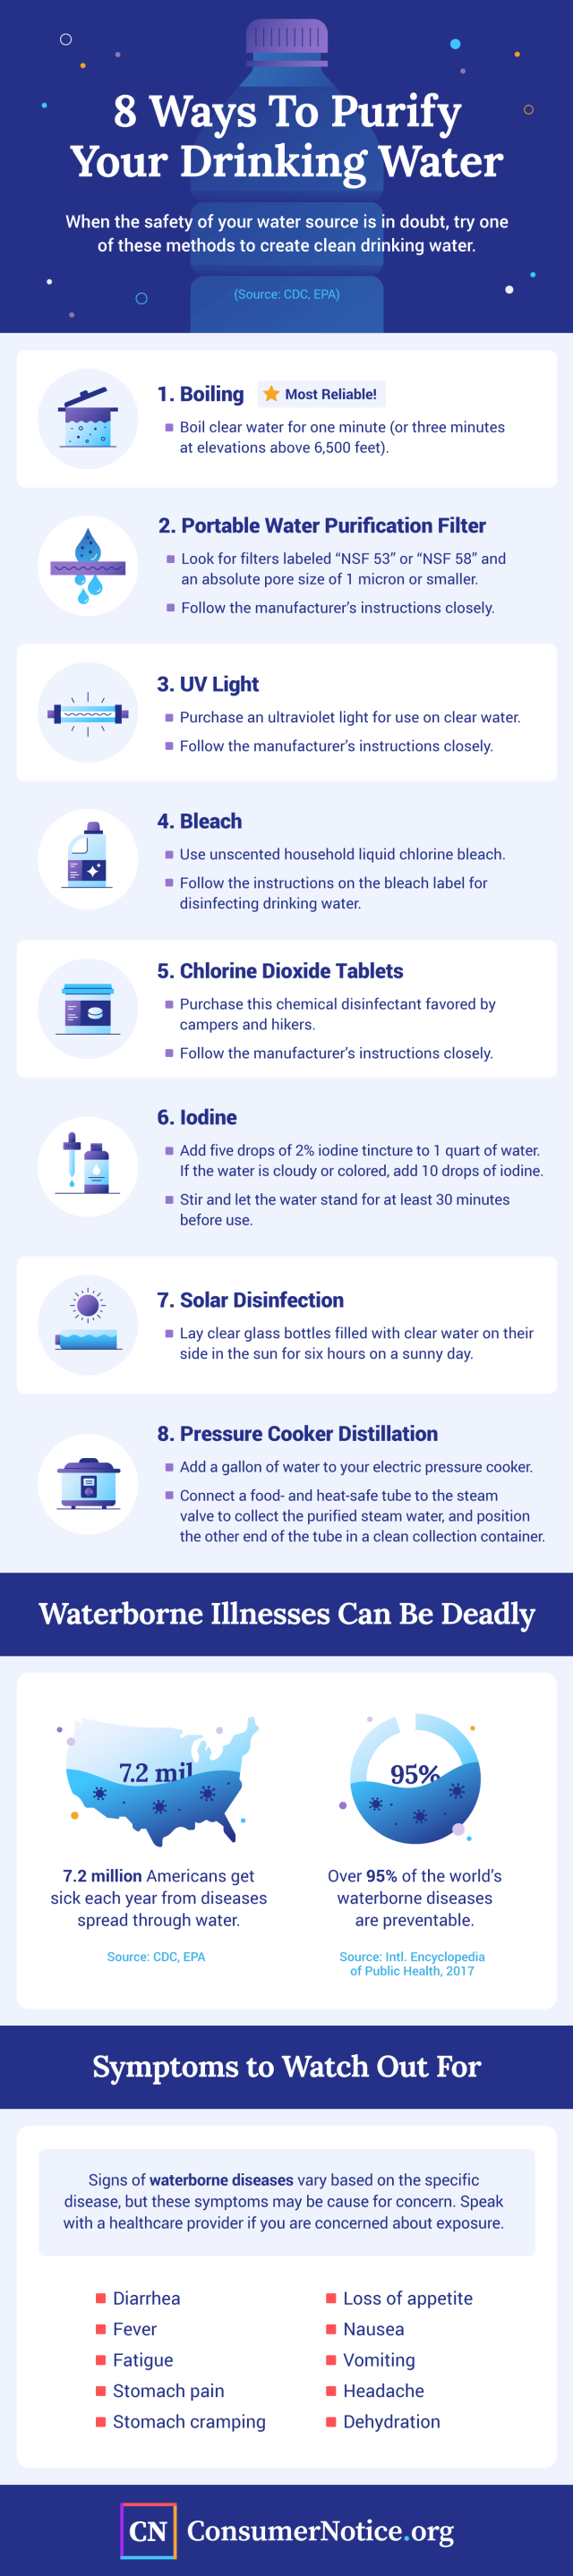 Infographic explaining ways to purify drinking water.